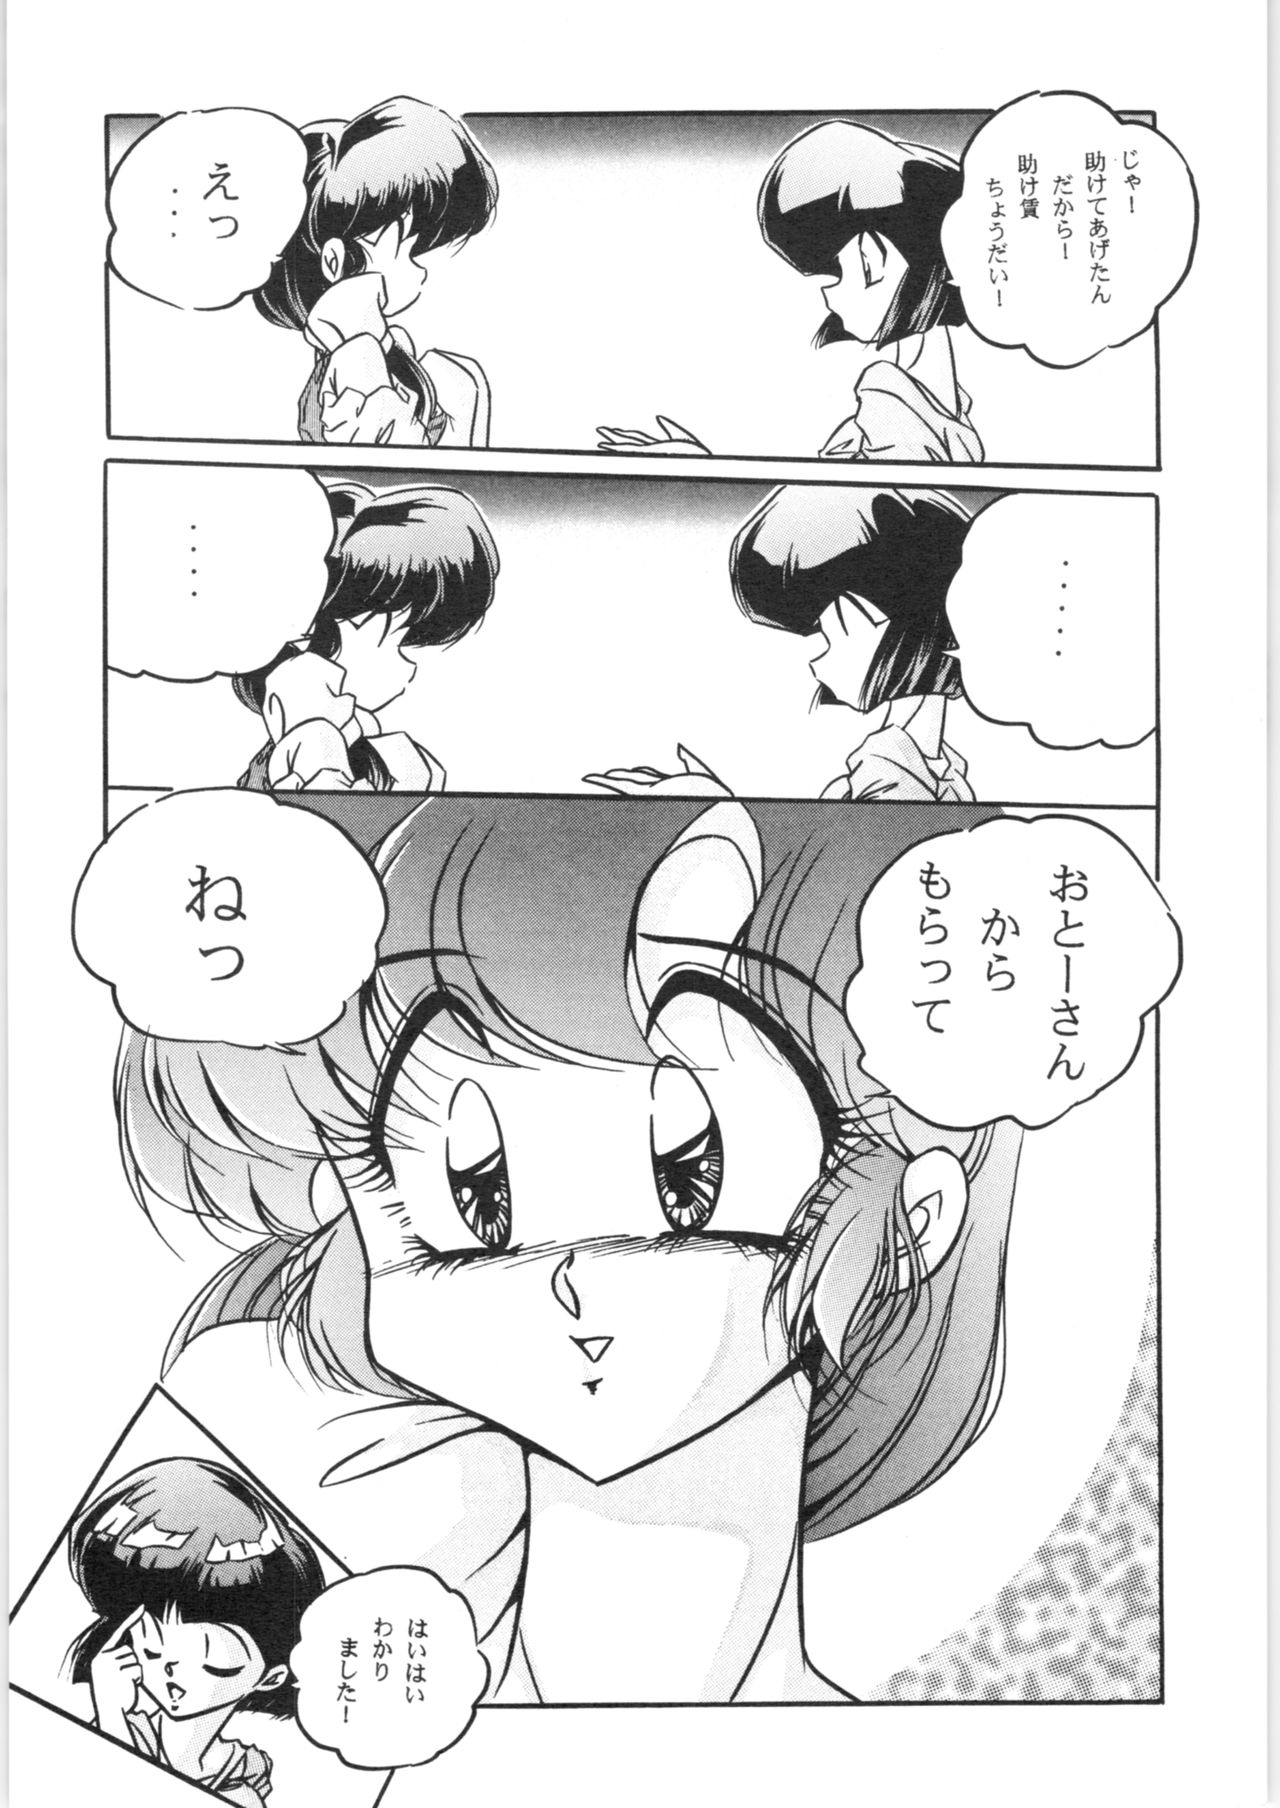 [C-COMPANY] C-COMPANY SPECIAL STAGE 18 (Ranma 1/2, Idol Project) page 15 full